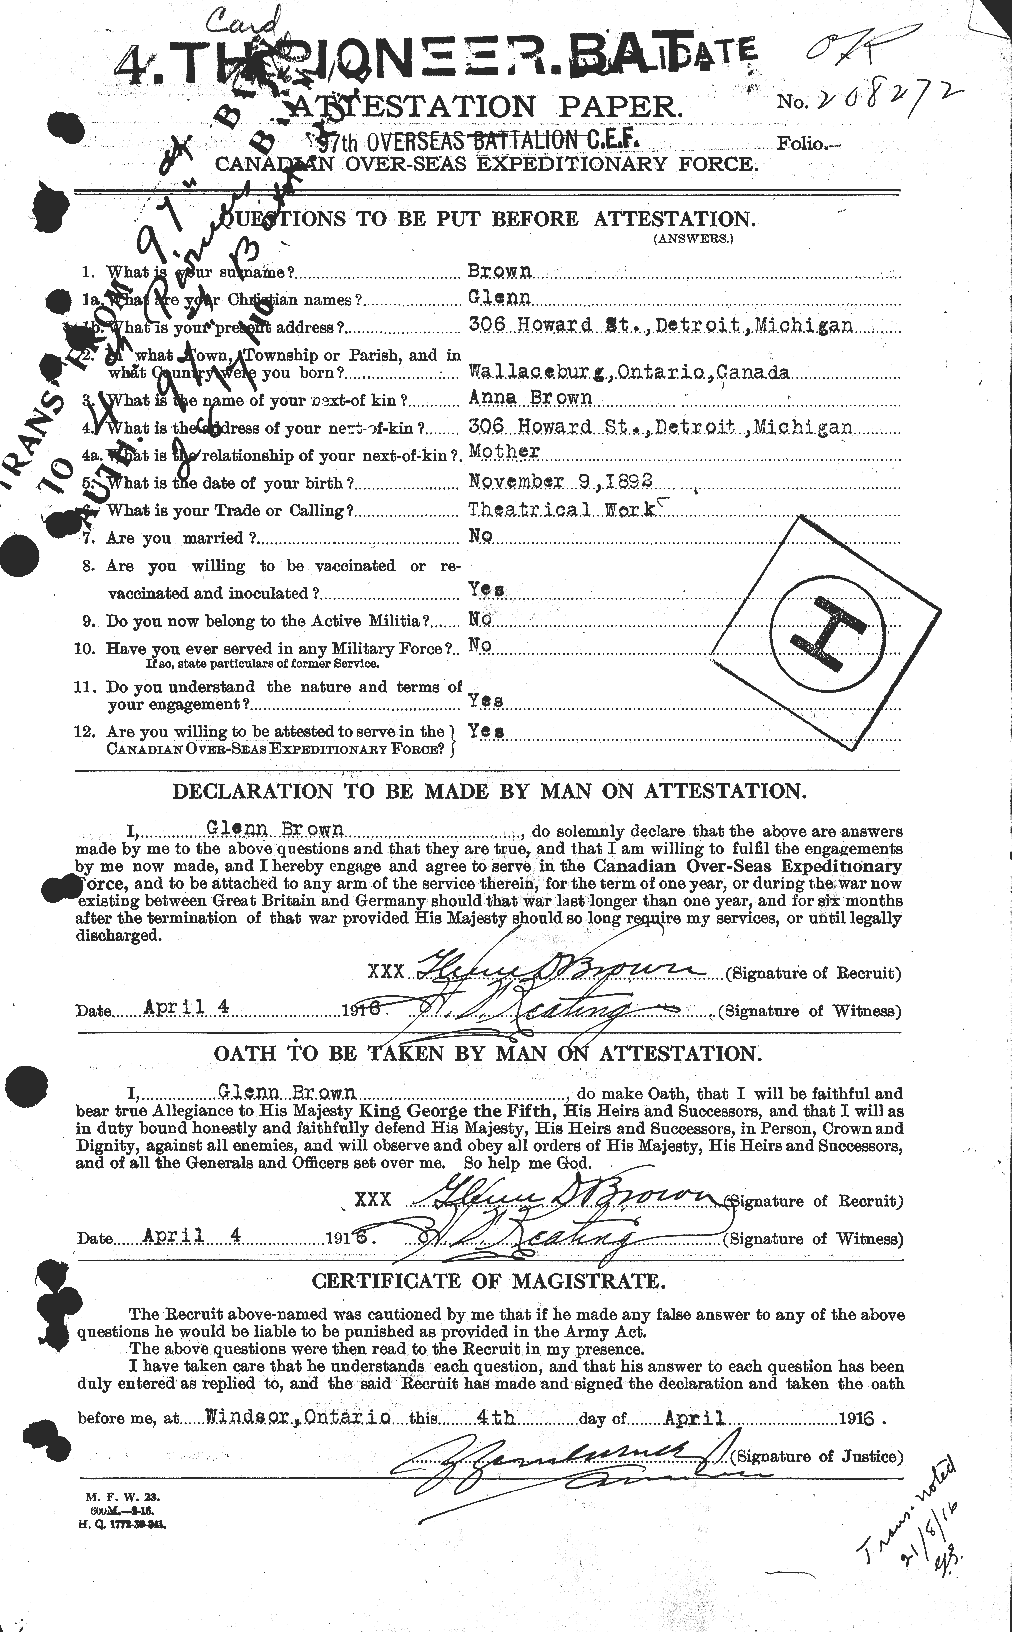 Personnel Records of the First World War - CEF 262617a